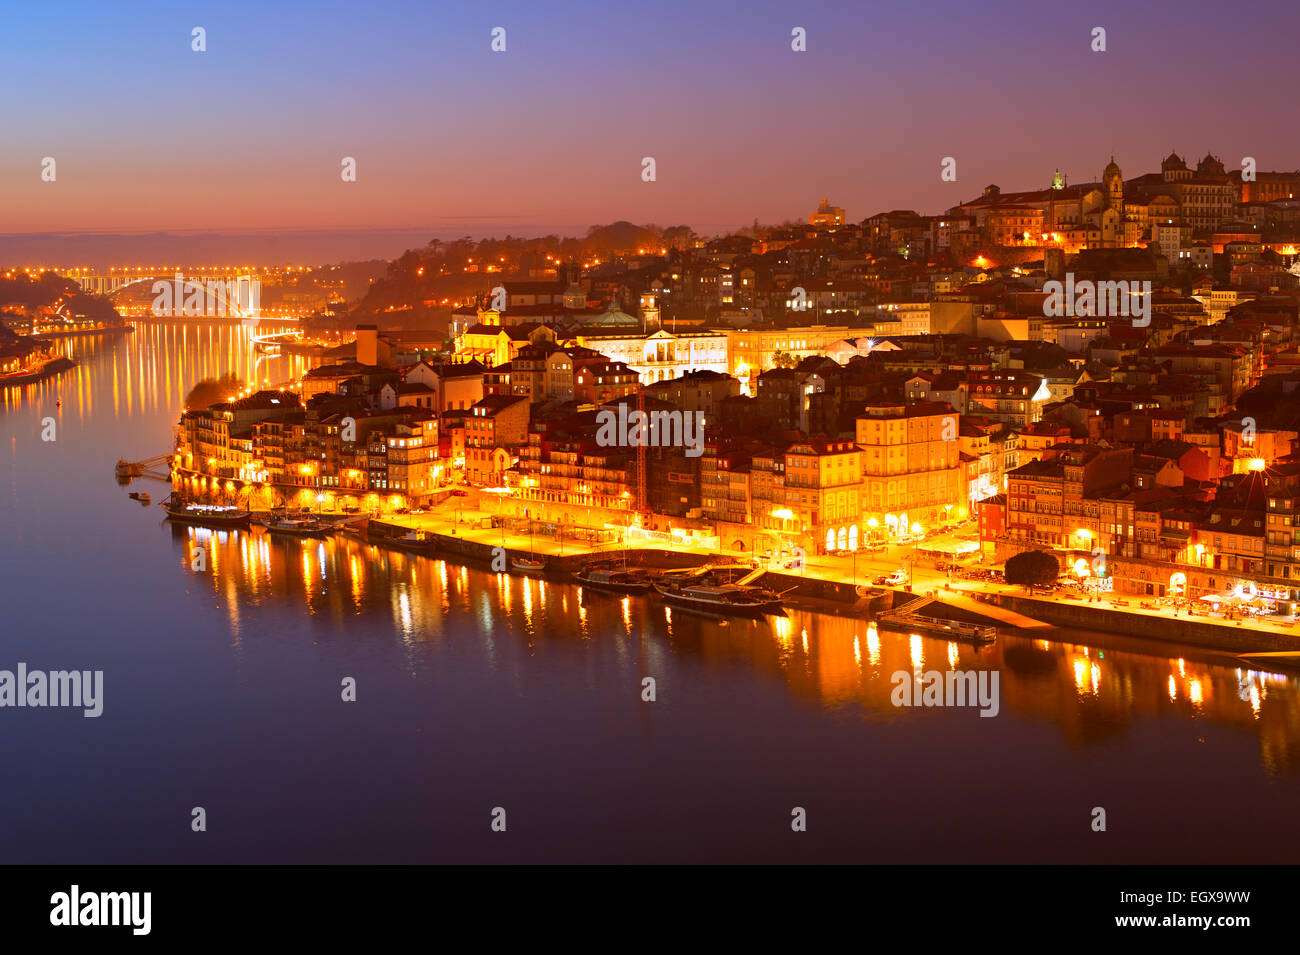 Romantic view of an Old Town of Porto at twilight, Portugal Stock Photo